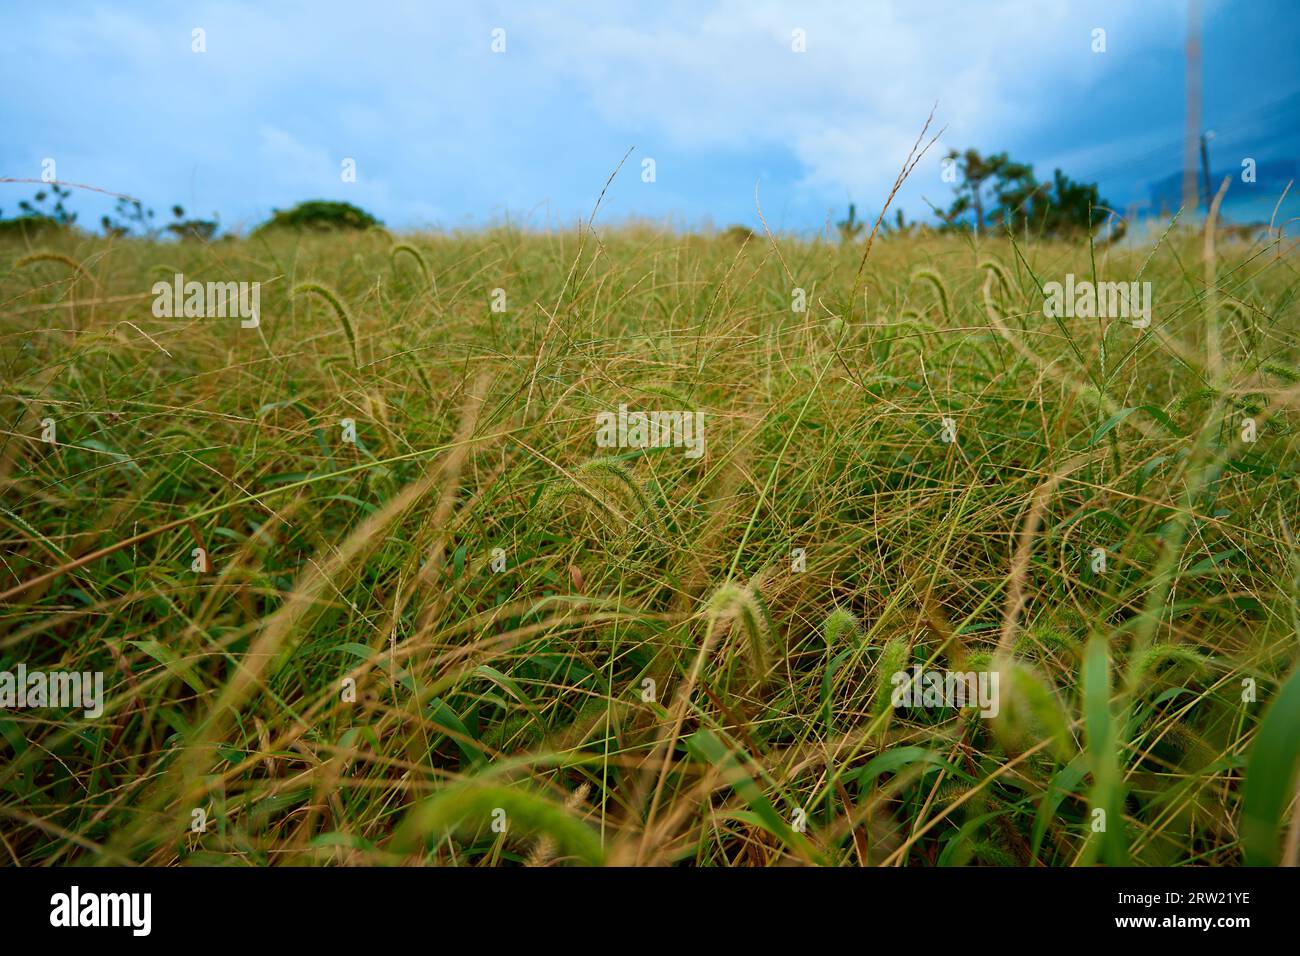 A landscape of a grassy field filled with dandelions and a blue sky Stock Photo